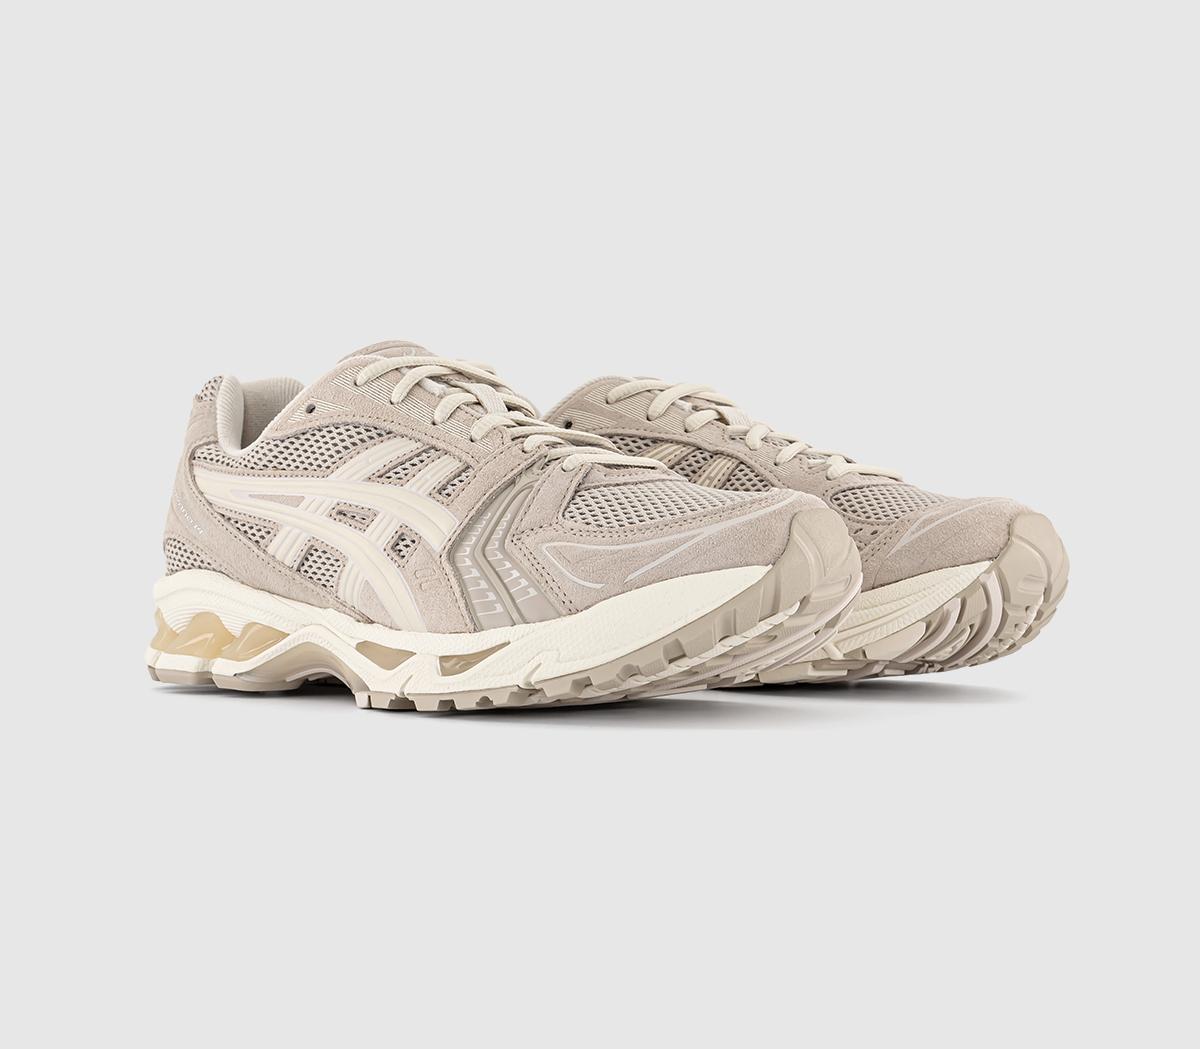 Asics Gel-kayano 14 Trainers Simply Taupe Oatmeal Natural, 10